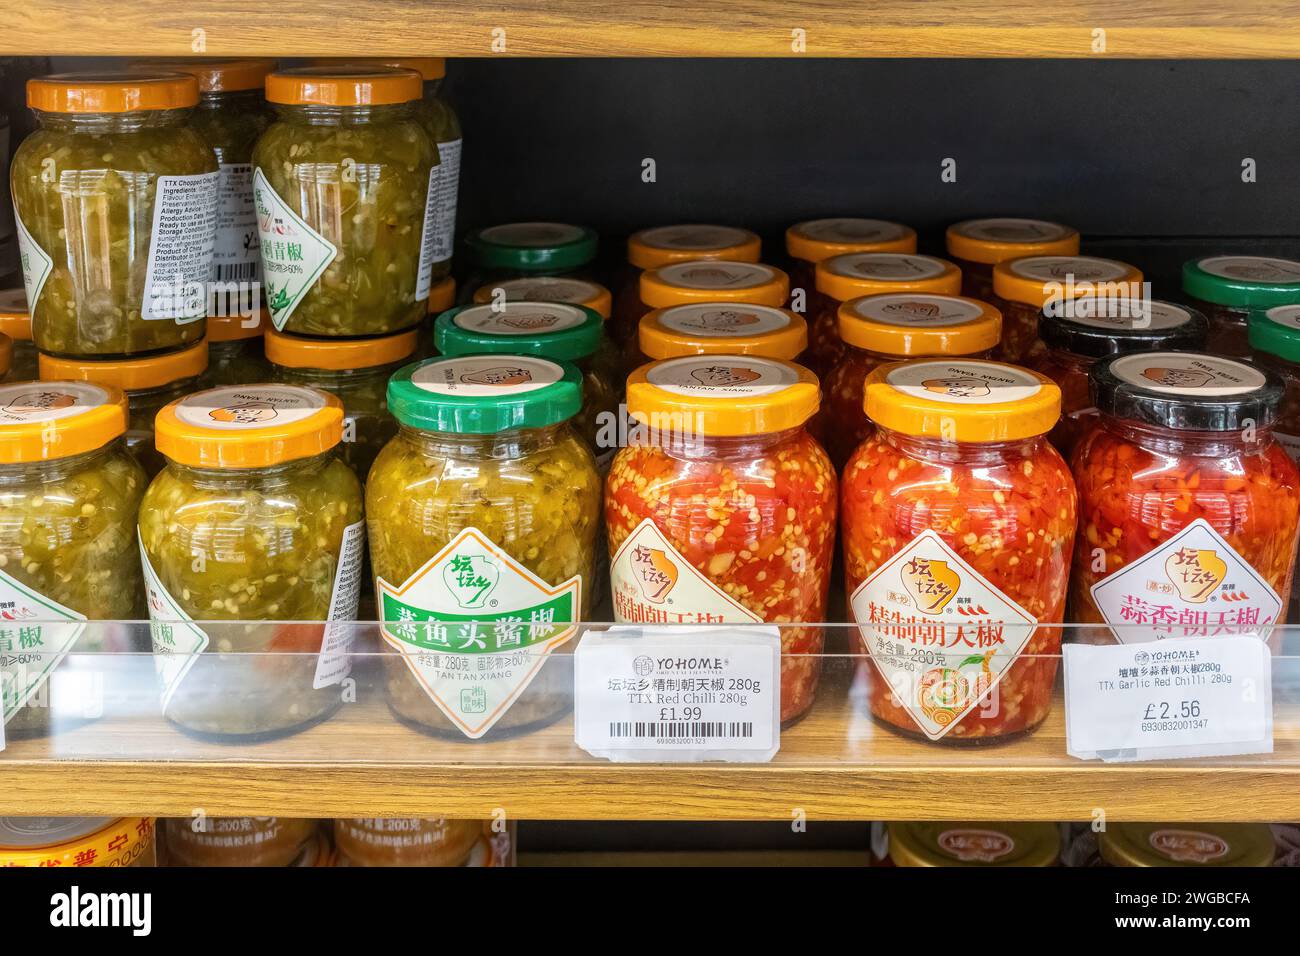 Asian Chinese Oriental food, red and green chilli in jars, in Yohome Oriental Lifestyle on supermarket shelves, London, England, UK Stock Photo